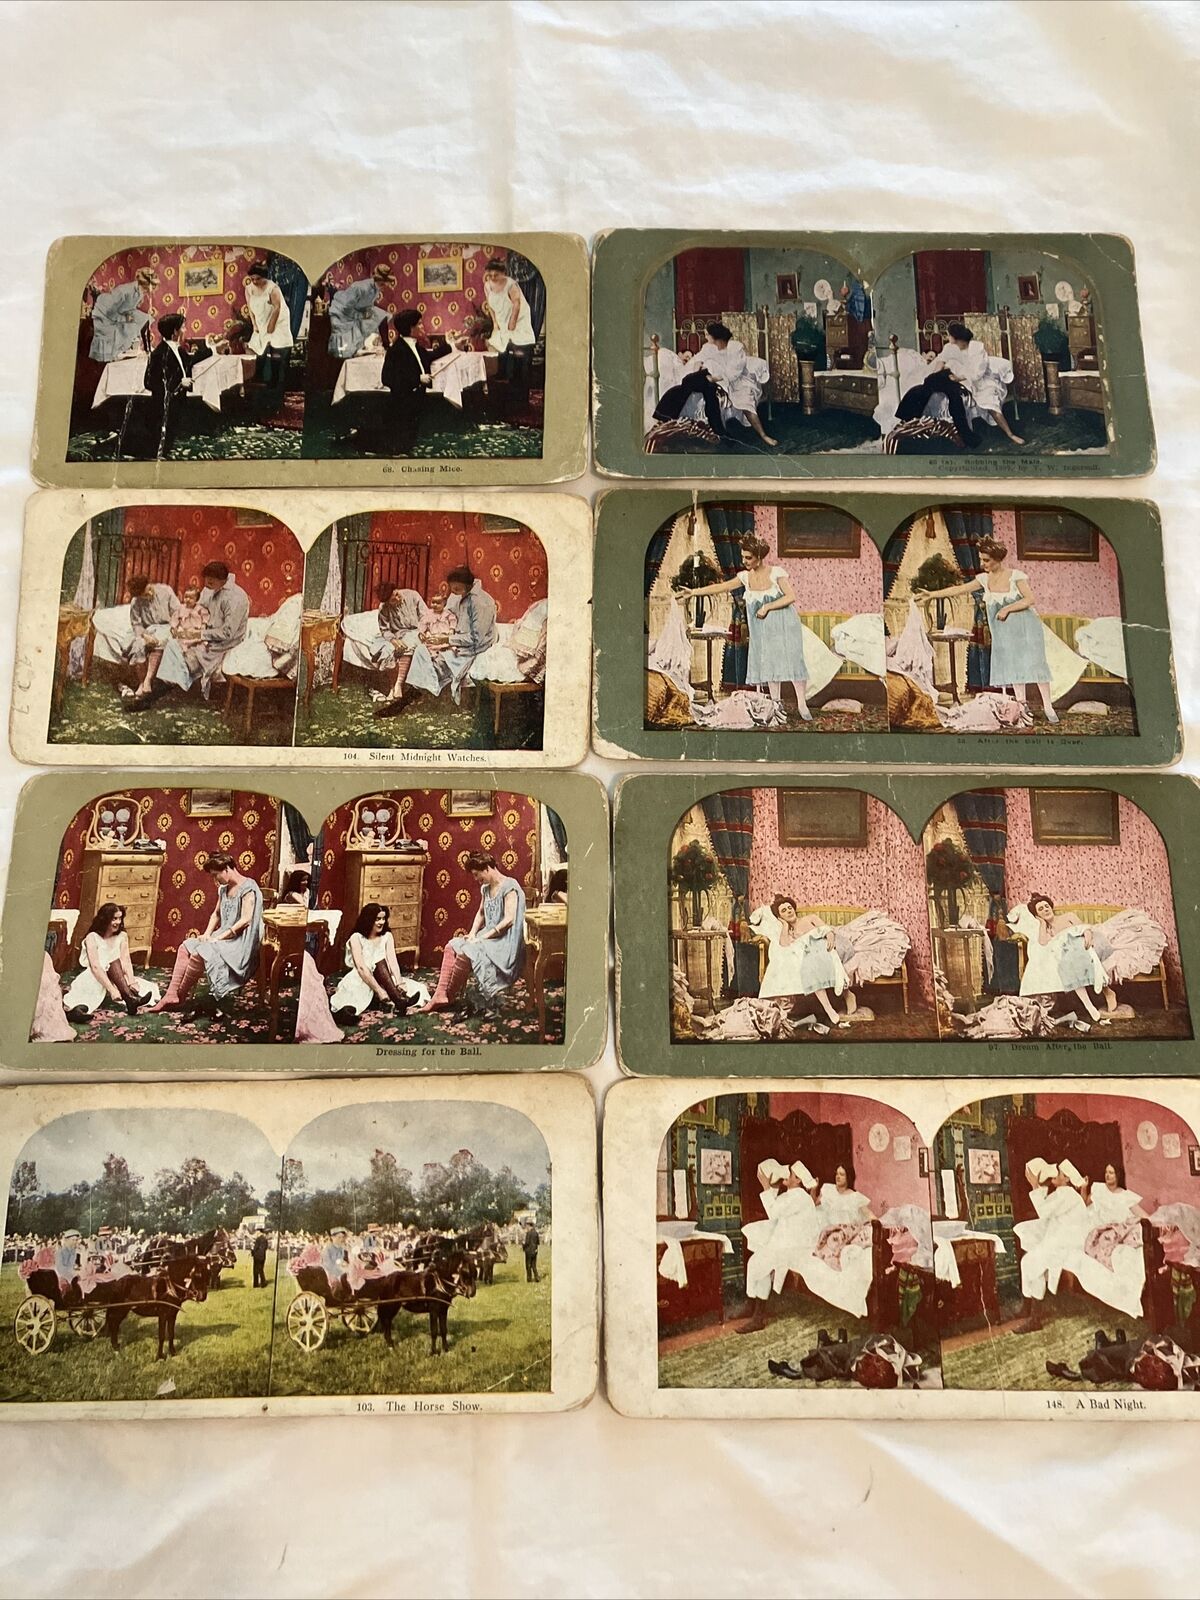 Stereopticon Viewer Cards 8 In Color 1898 - the Ball, Bad Night, Horse Show